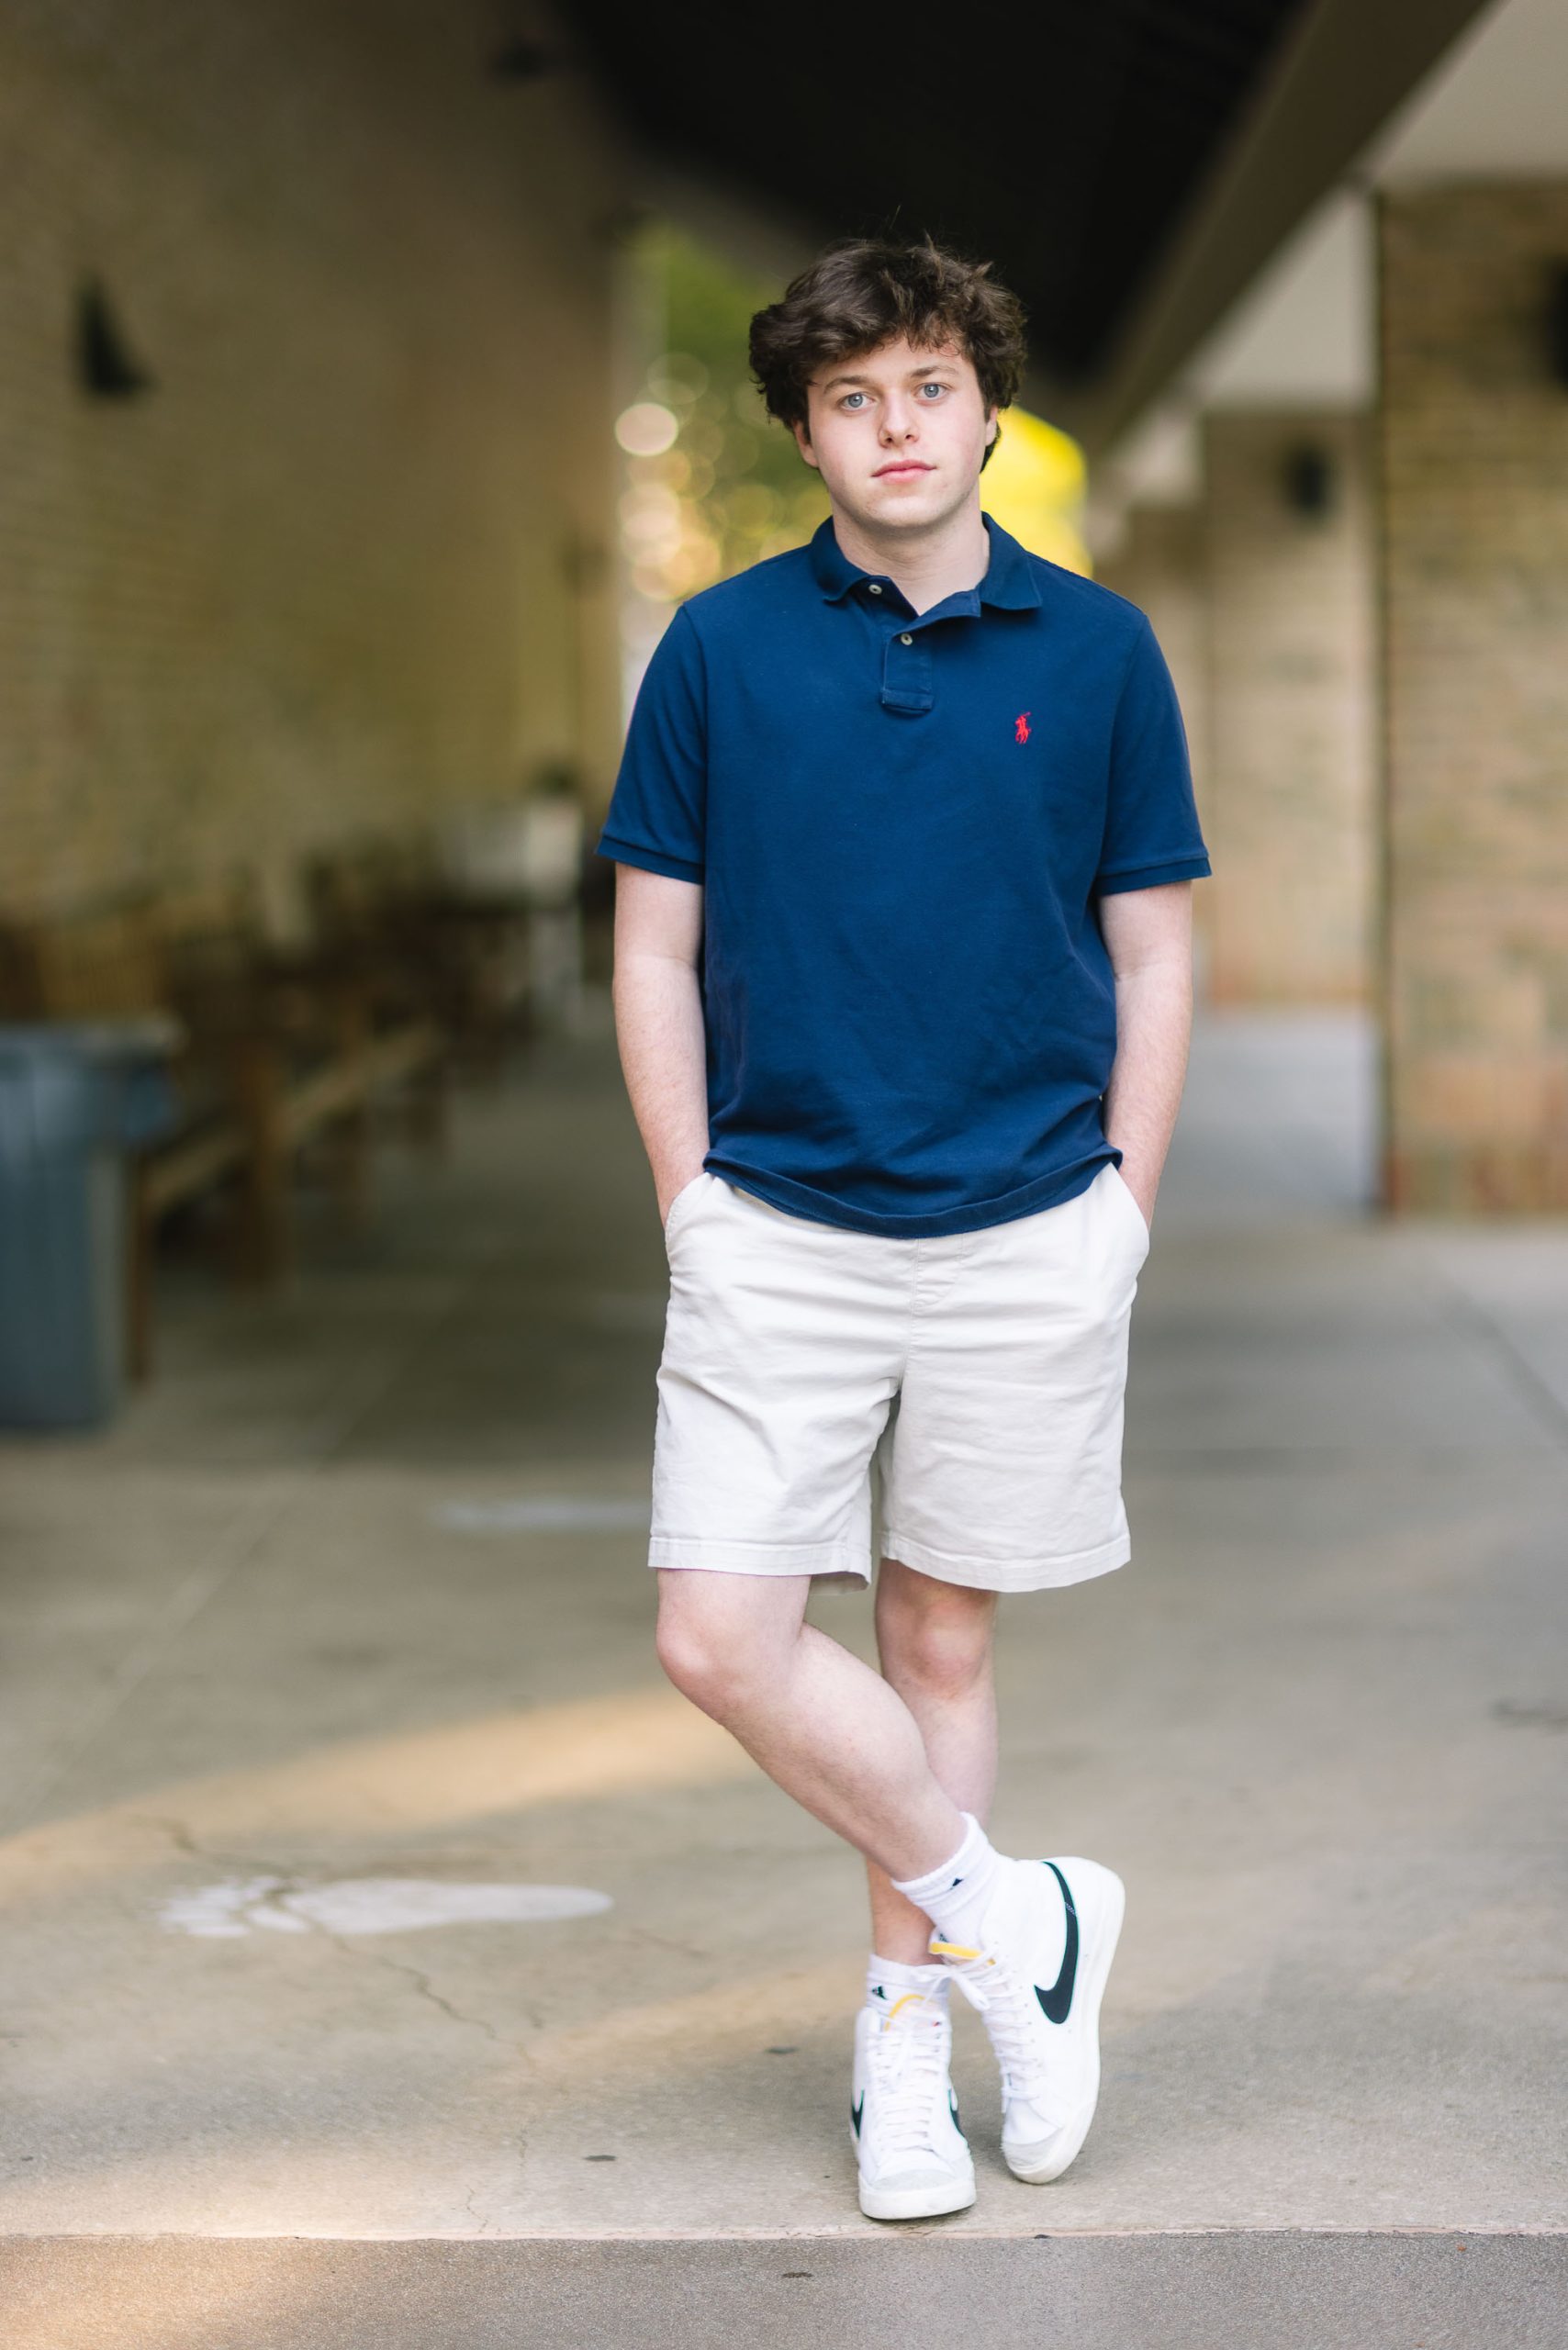 A young man wearing a polo shirt and shorts poses for a portrait.